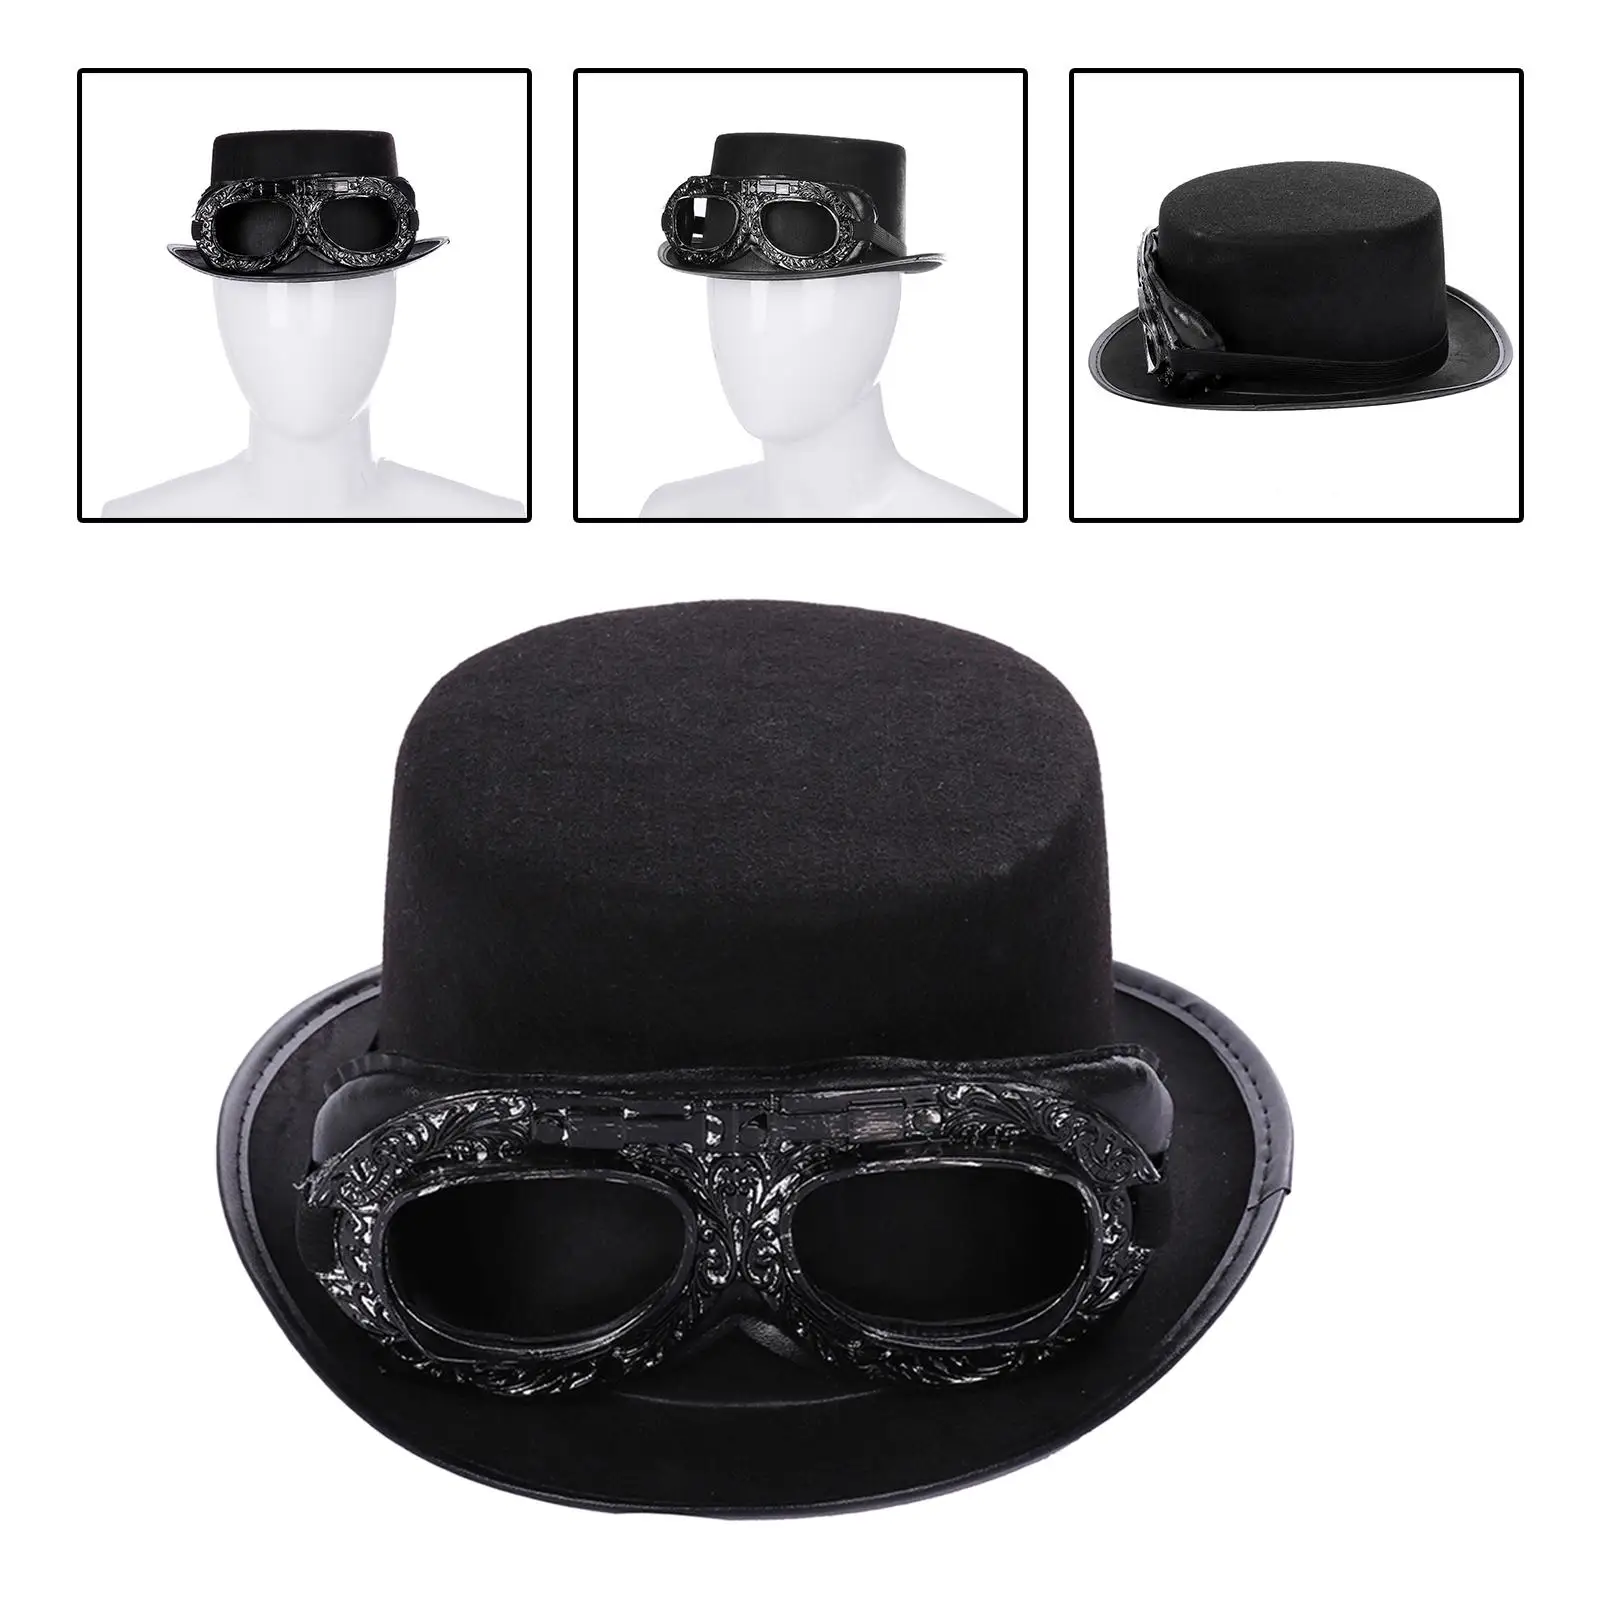 Deluxe Steampunk Top Hat with Goggles Vintage Style Formal Novelty Costume Hat Punk Gear for Unisex Halloween Costume Accessory